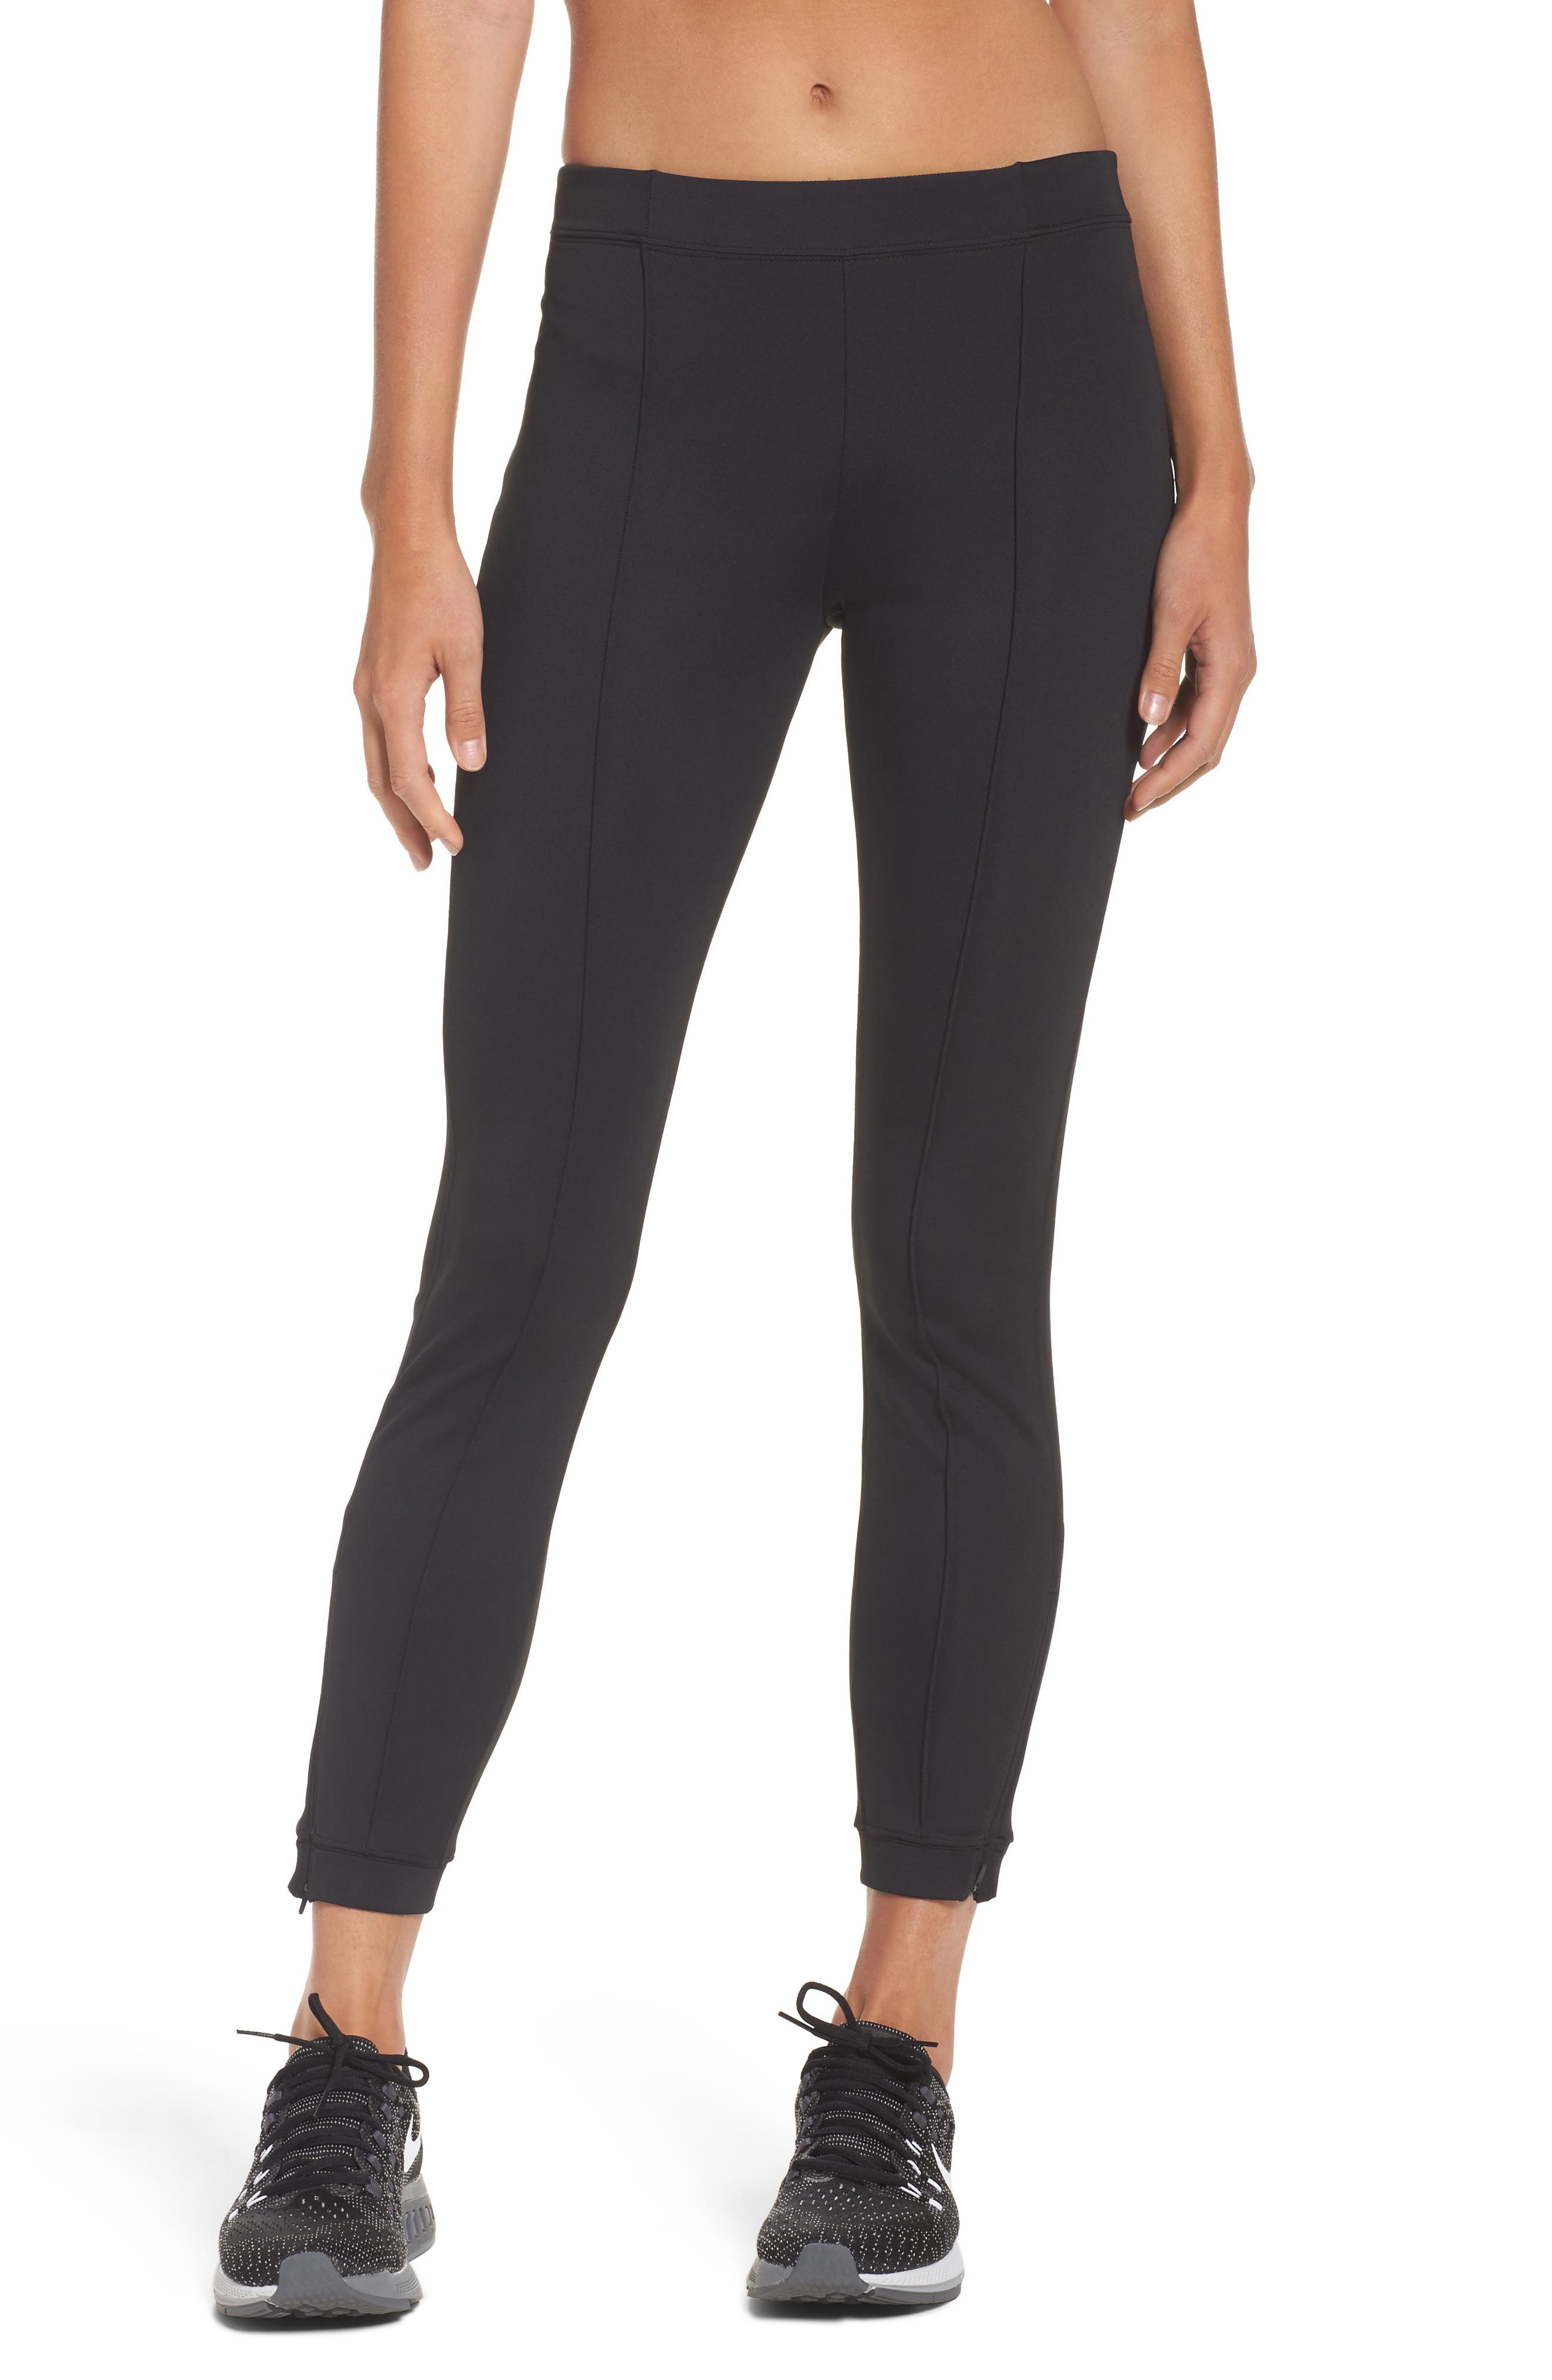 nike leggings with zipper at ankle